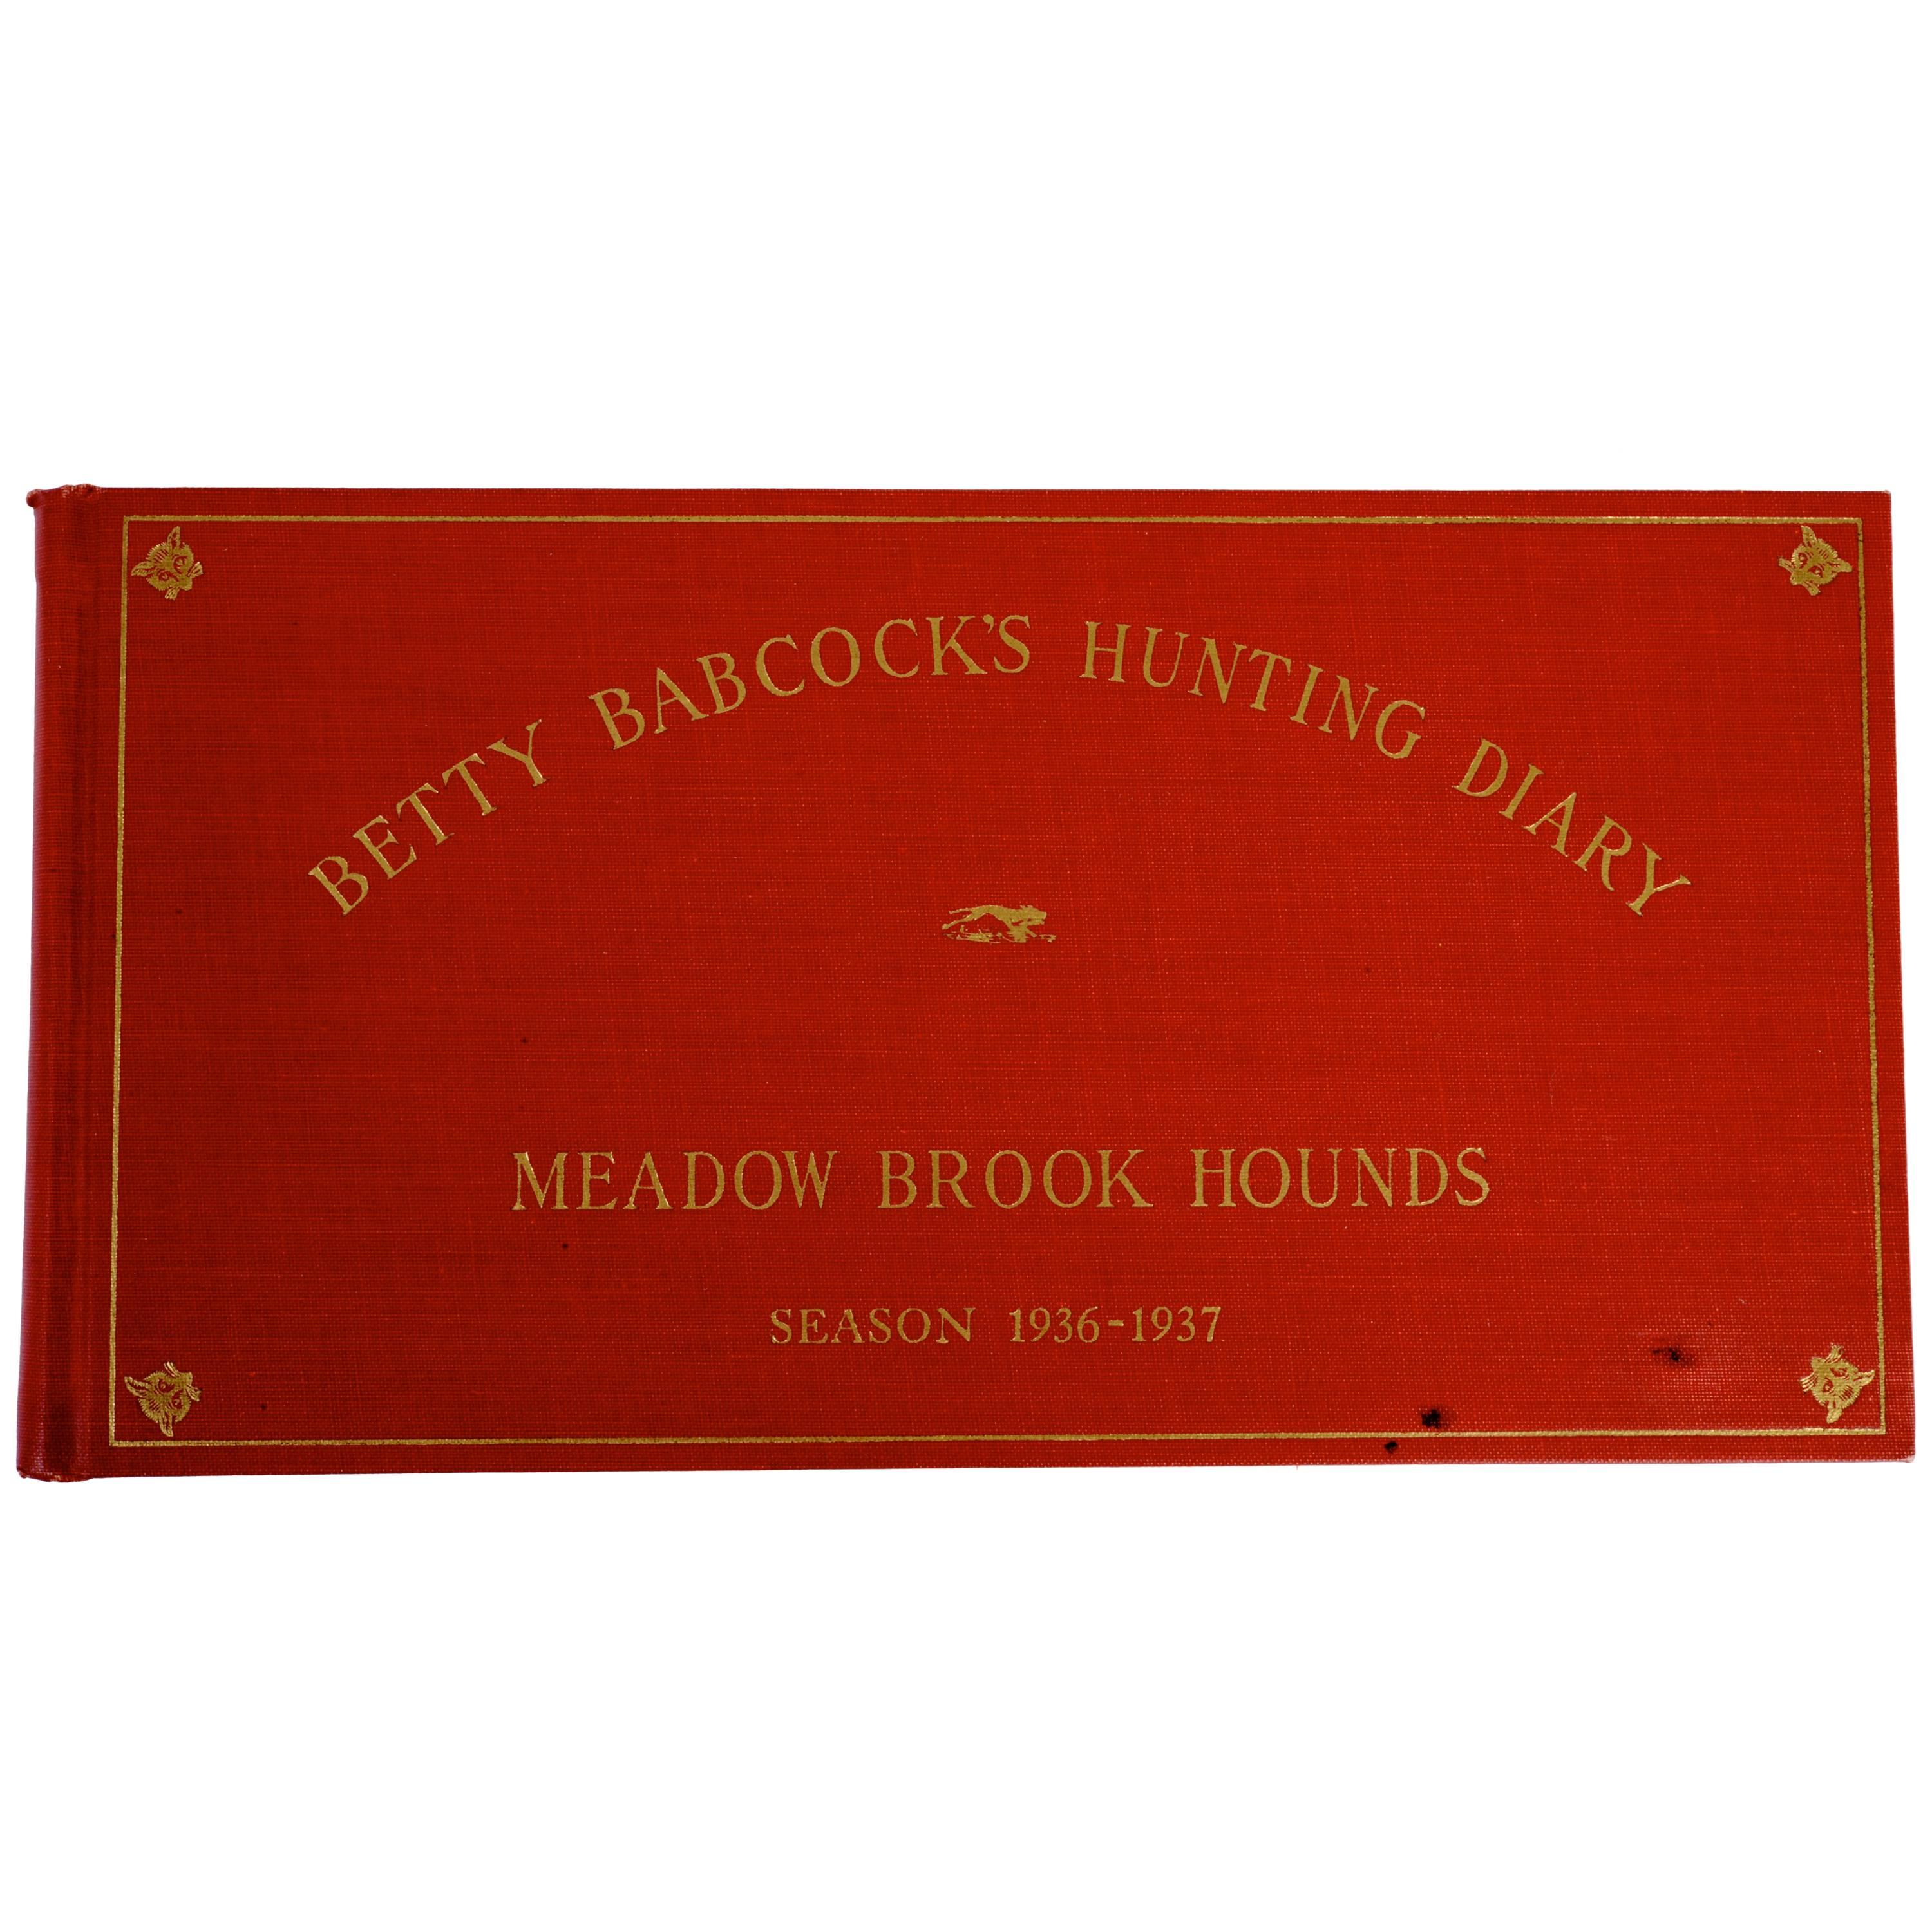 Betty Babcock's Illustrated Hunting Diary